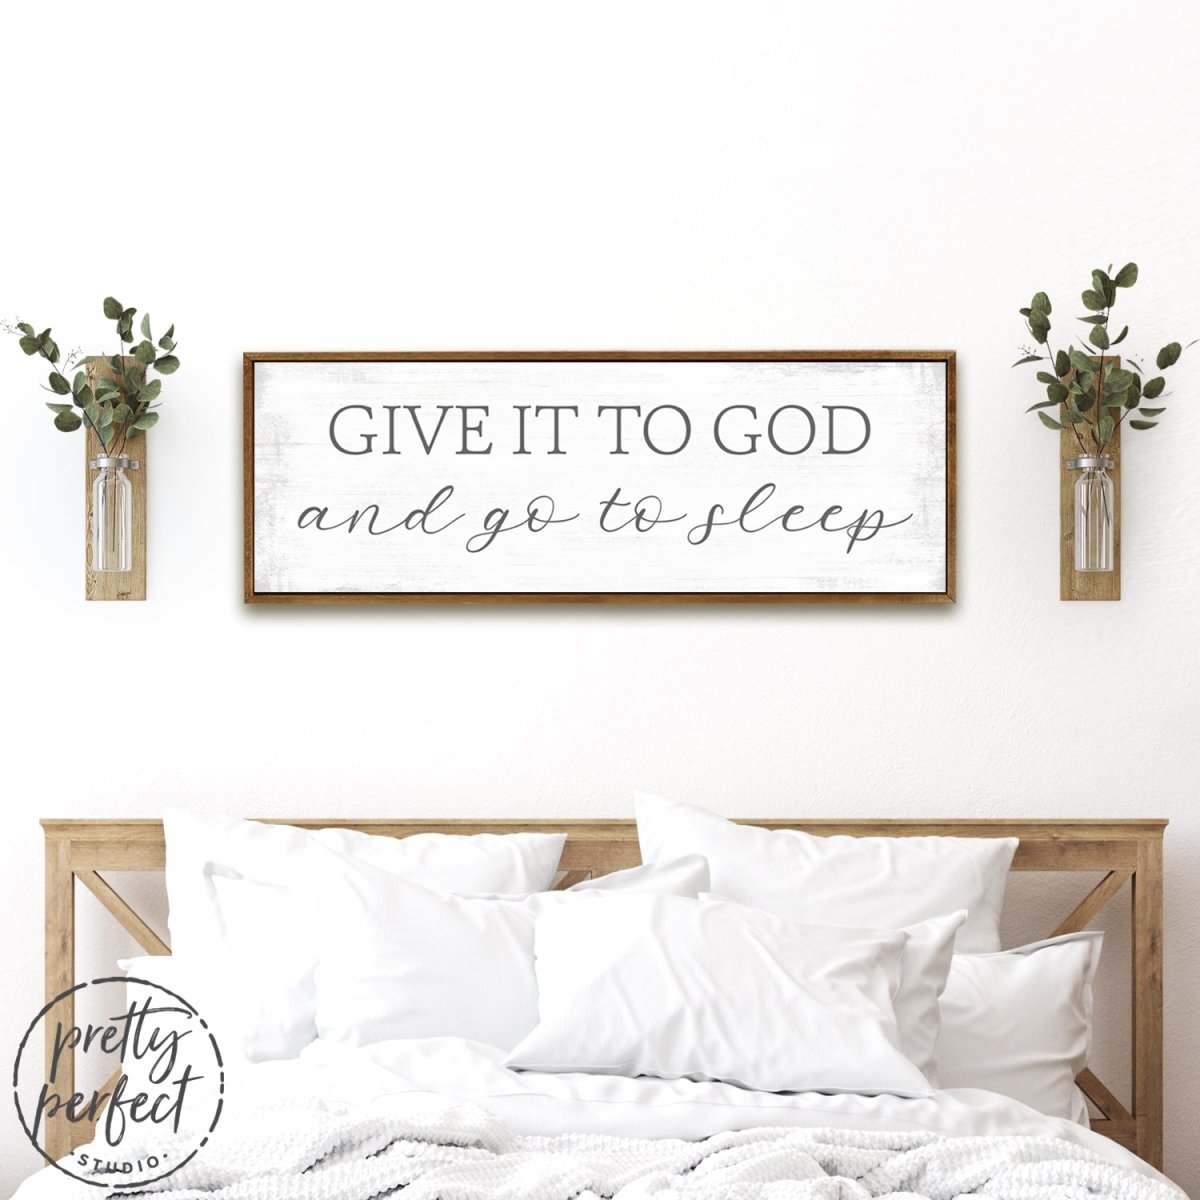 Give It To God and Go To Sleep Sign Above Bed - Pretty Perfect Studio